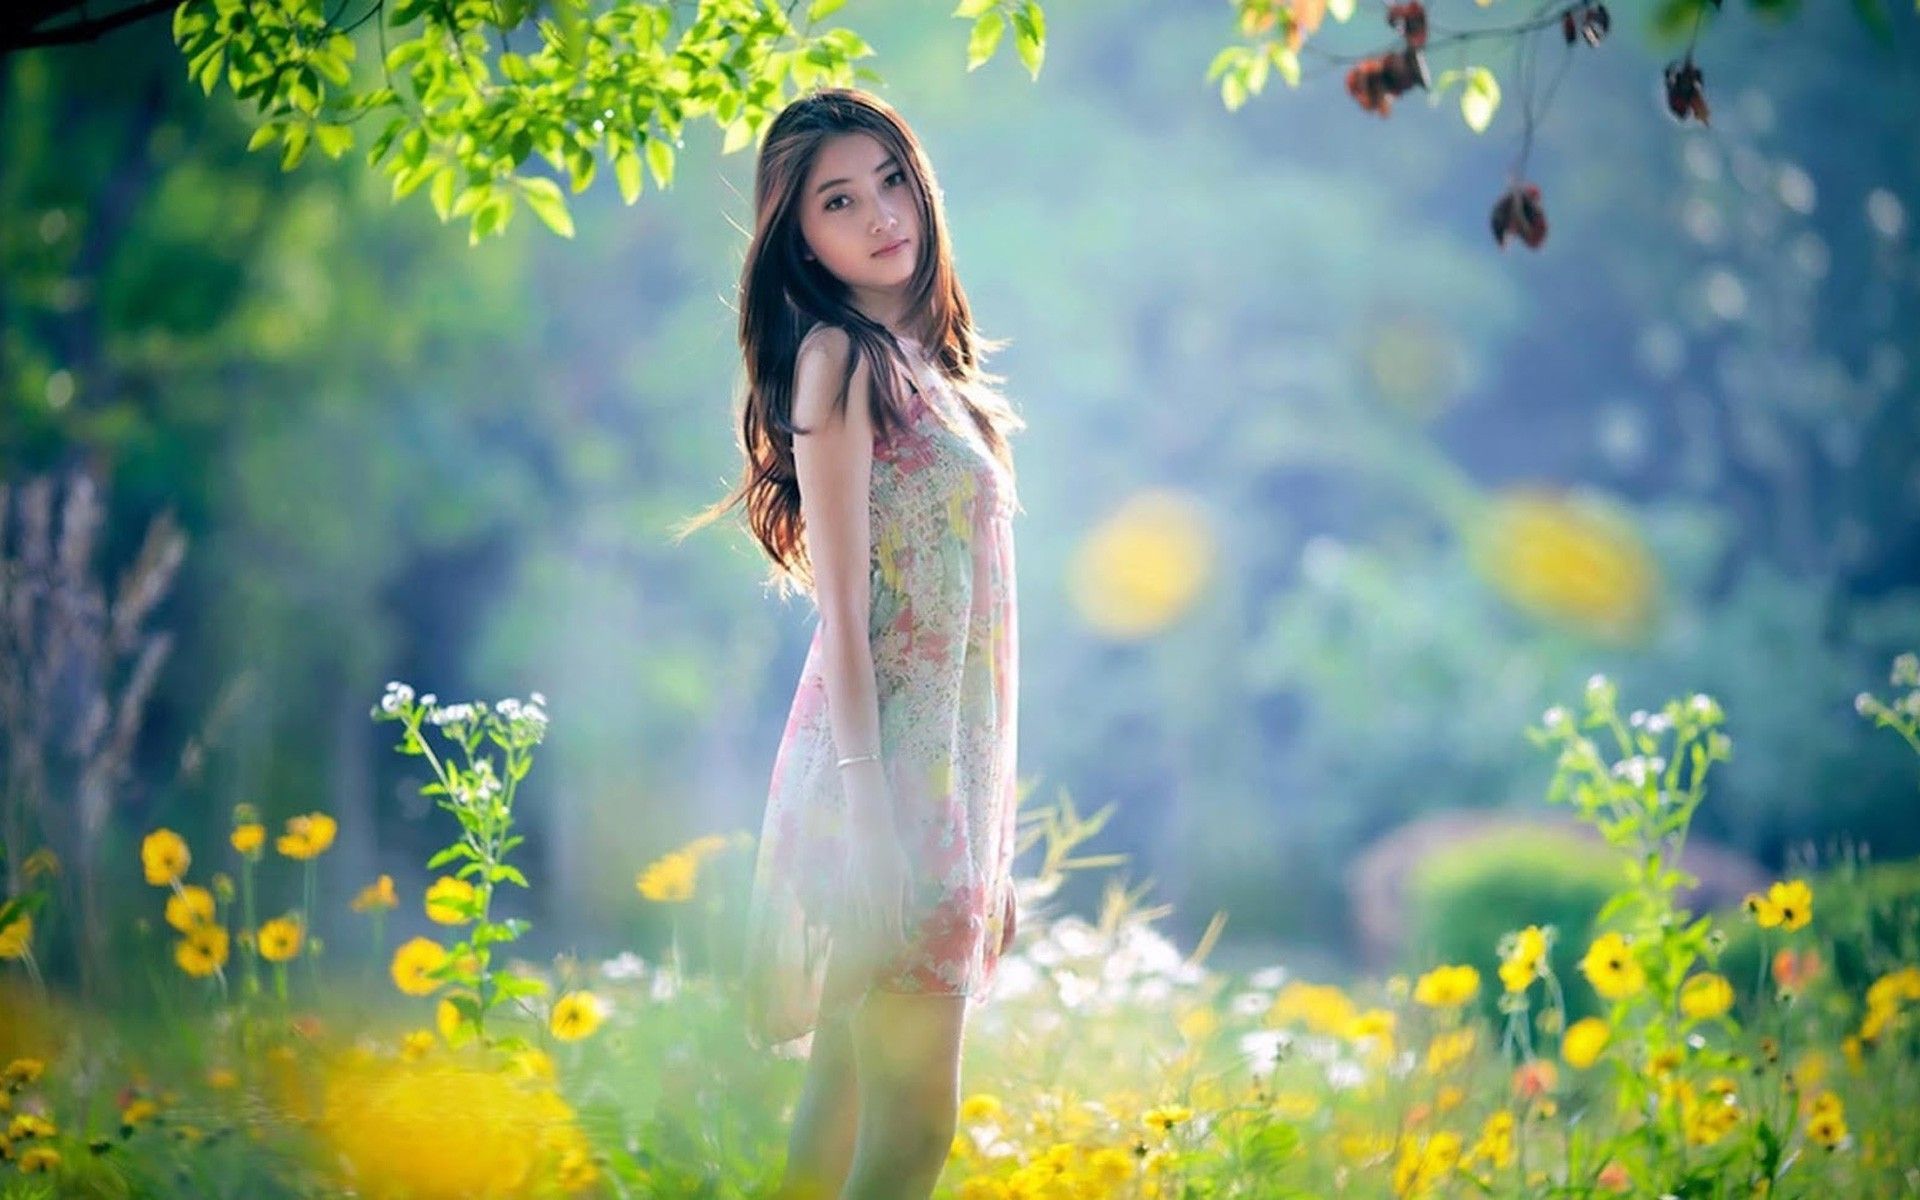 Girl in Nature Wallpaper Free Girl in Nature Background